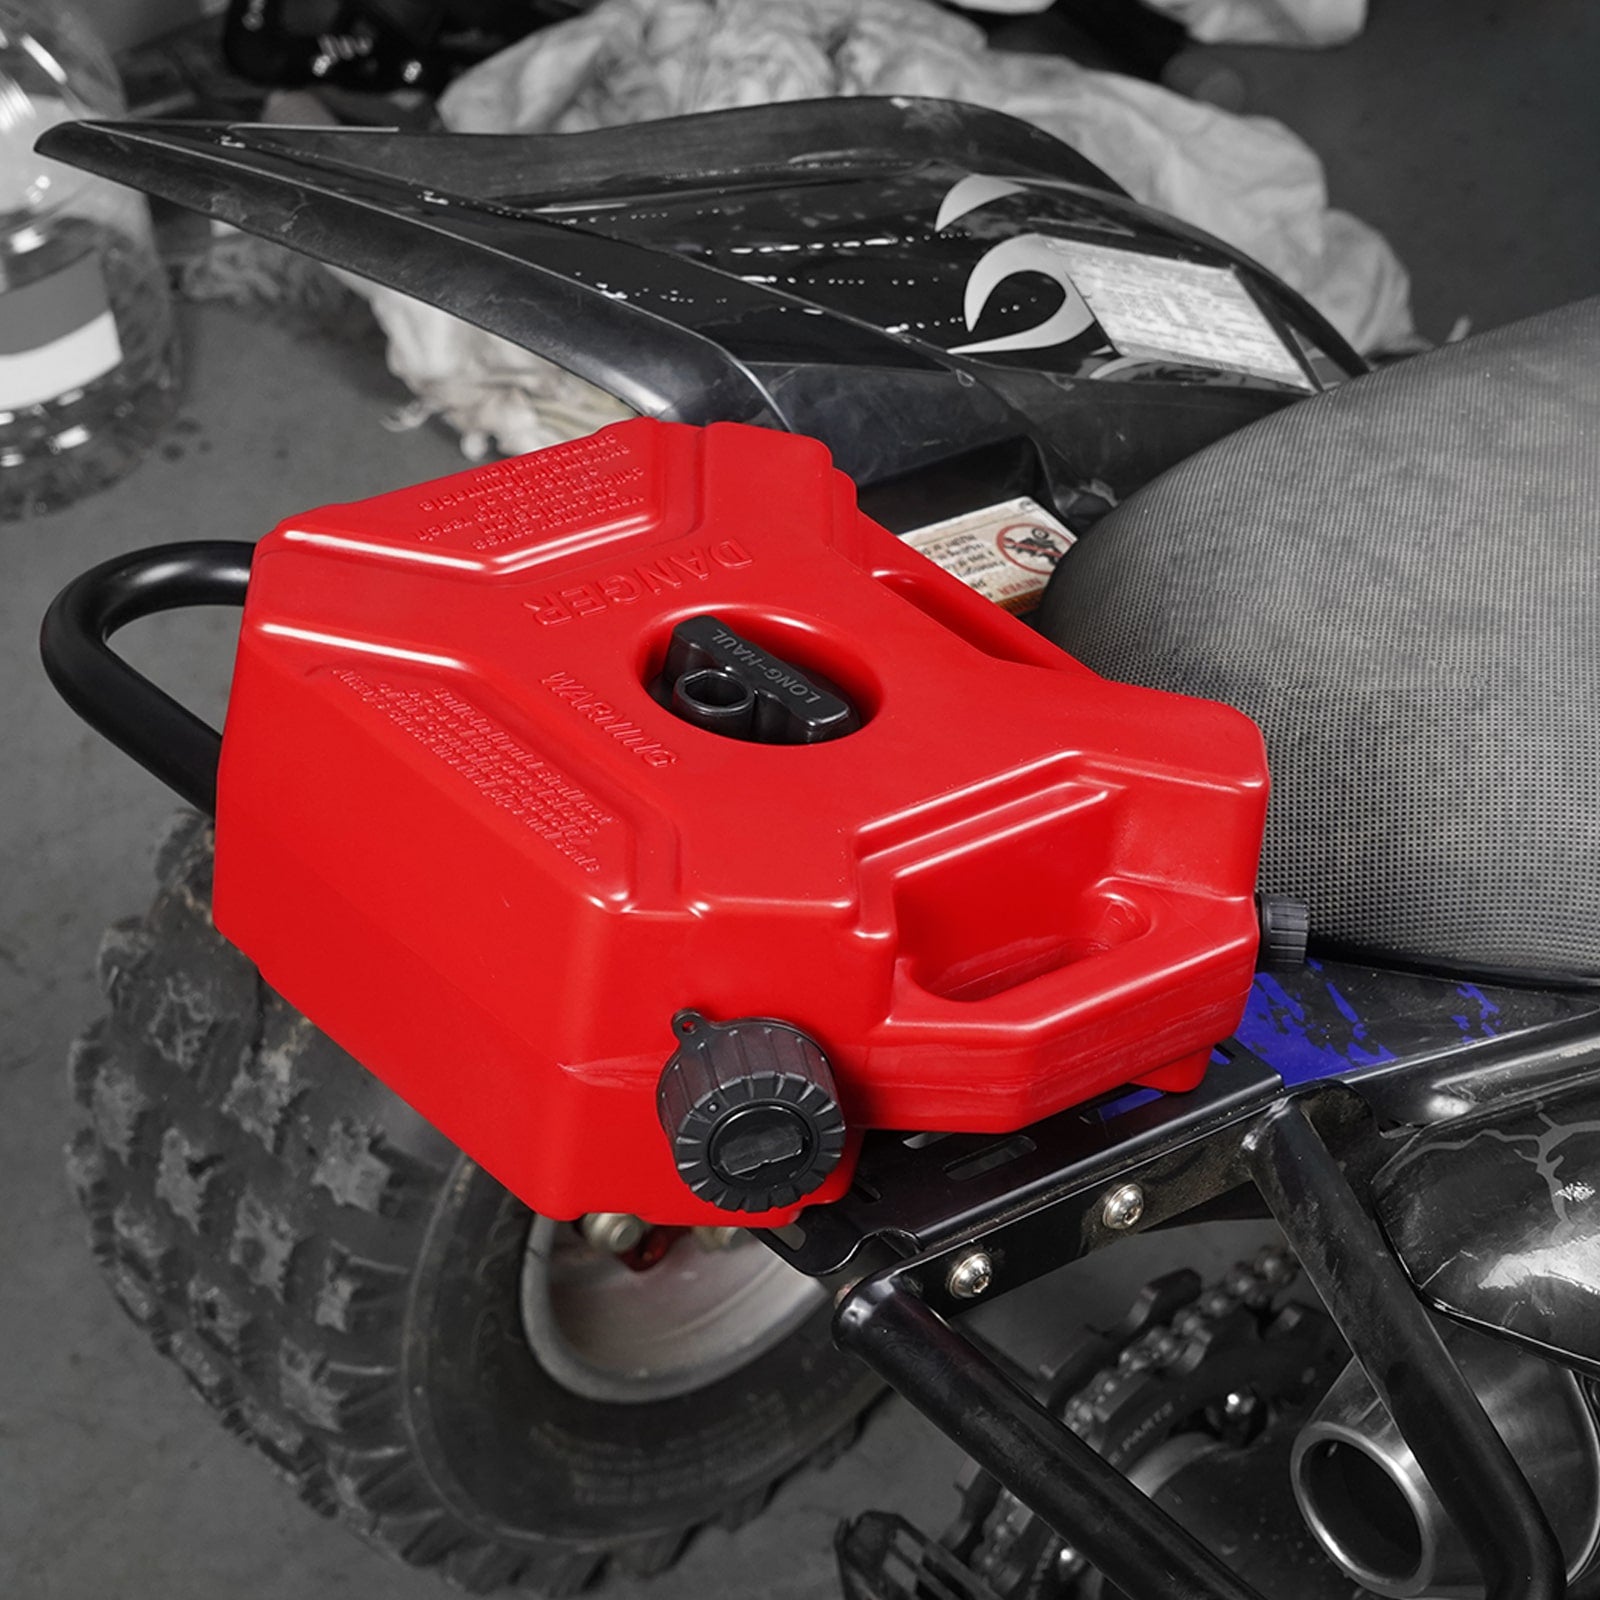 1.3GL/5L Portable Gas Fuel Tank Jerry Can Tank Oil Containers For ATV UTV Motorcycle Car